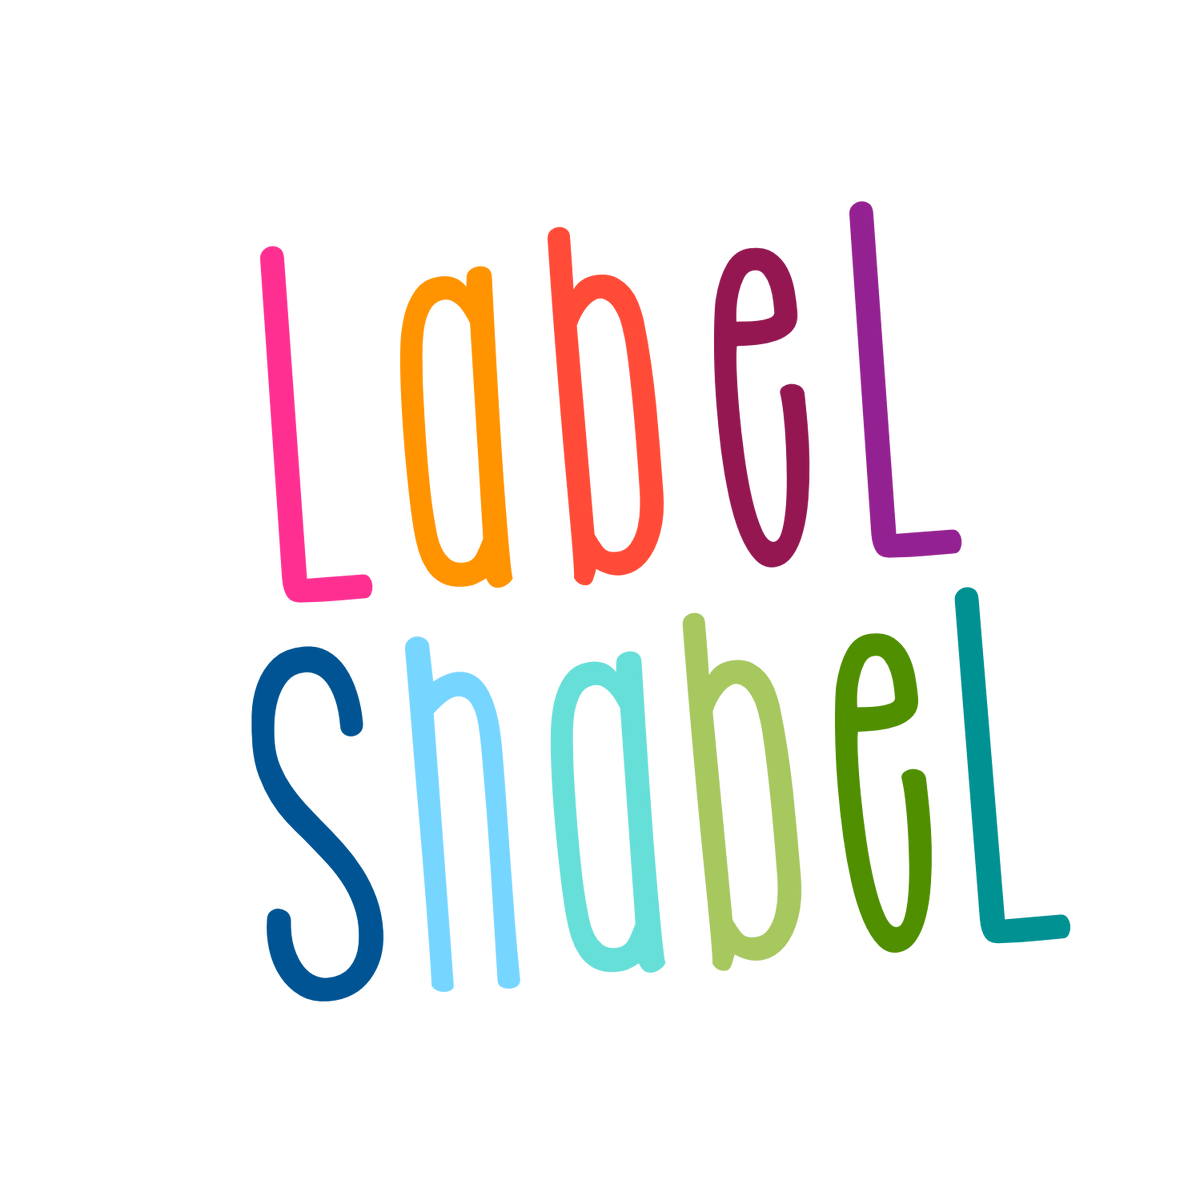 Personalised Wrapping Papers - Birthday Fun/ Label Shabel – Labelshabel